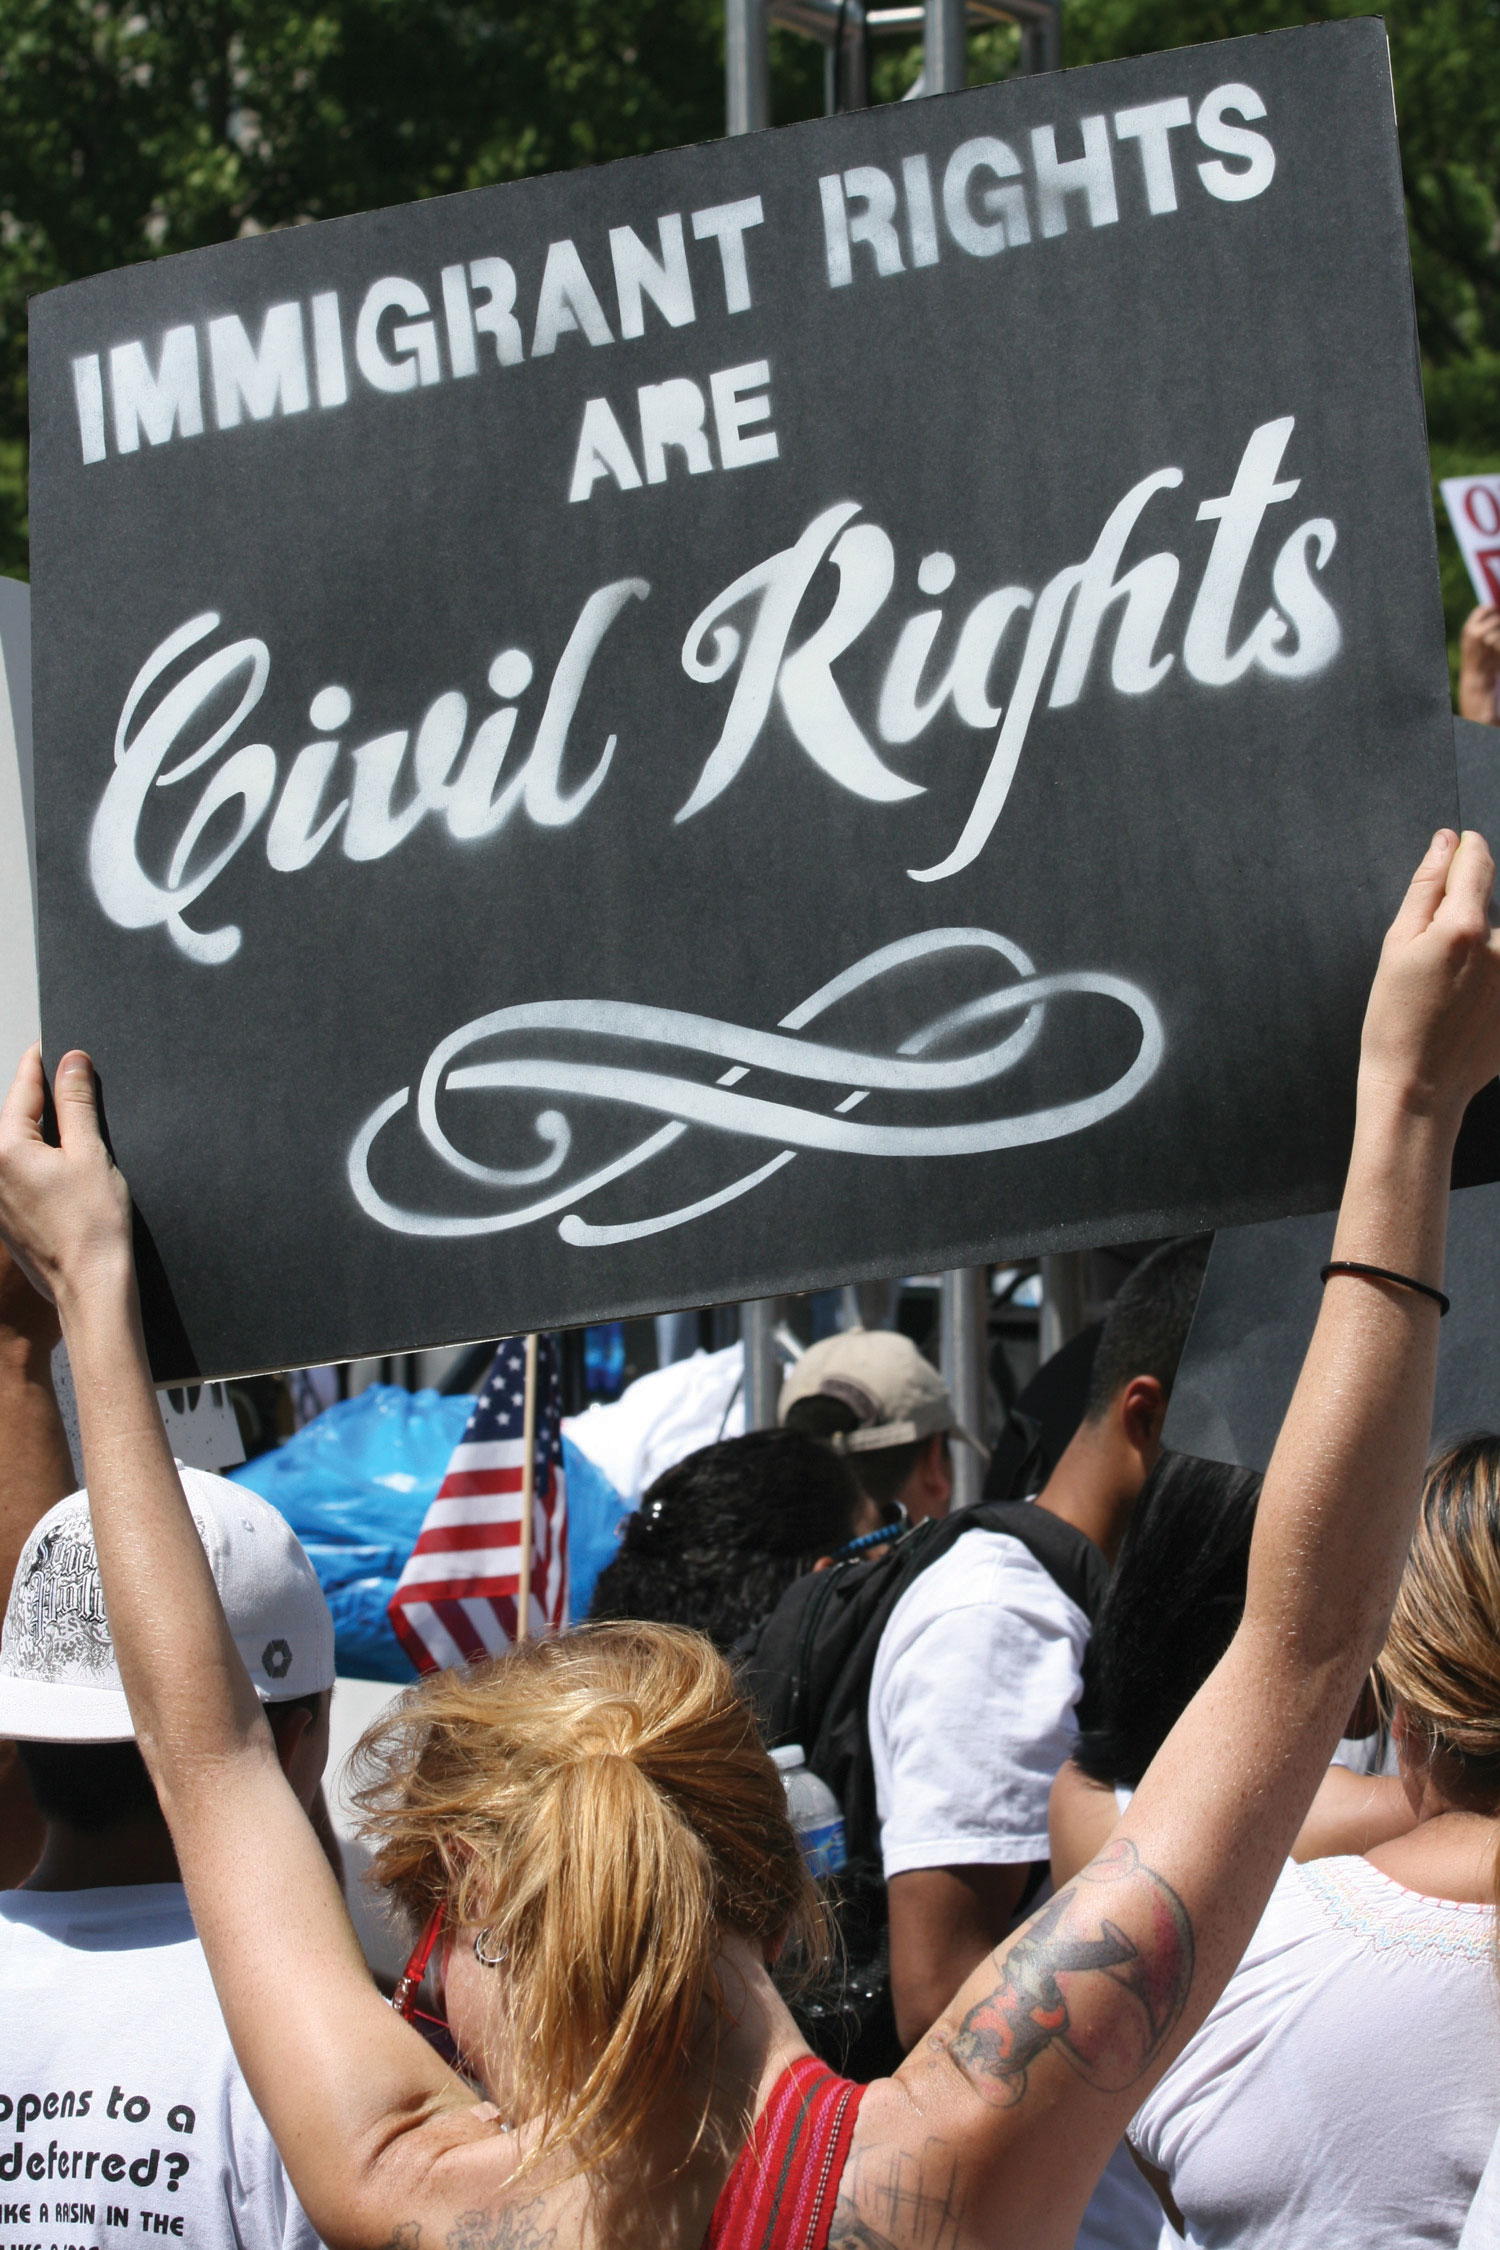 A protest of Immigration Reform. A woman holds up a sign